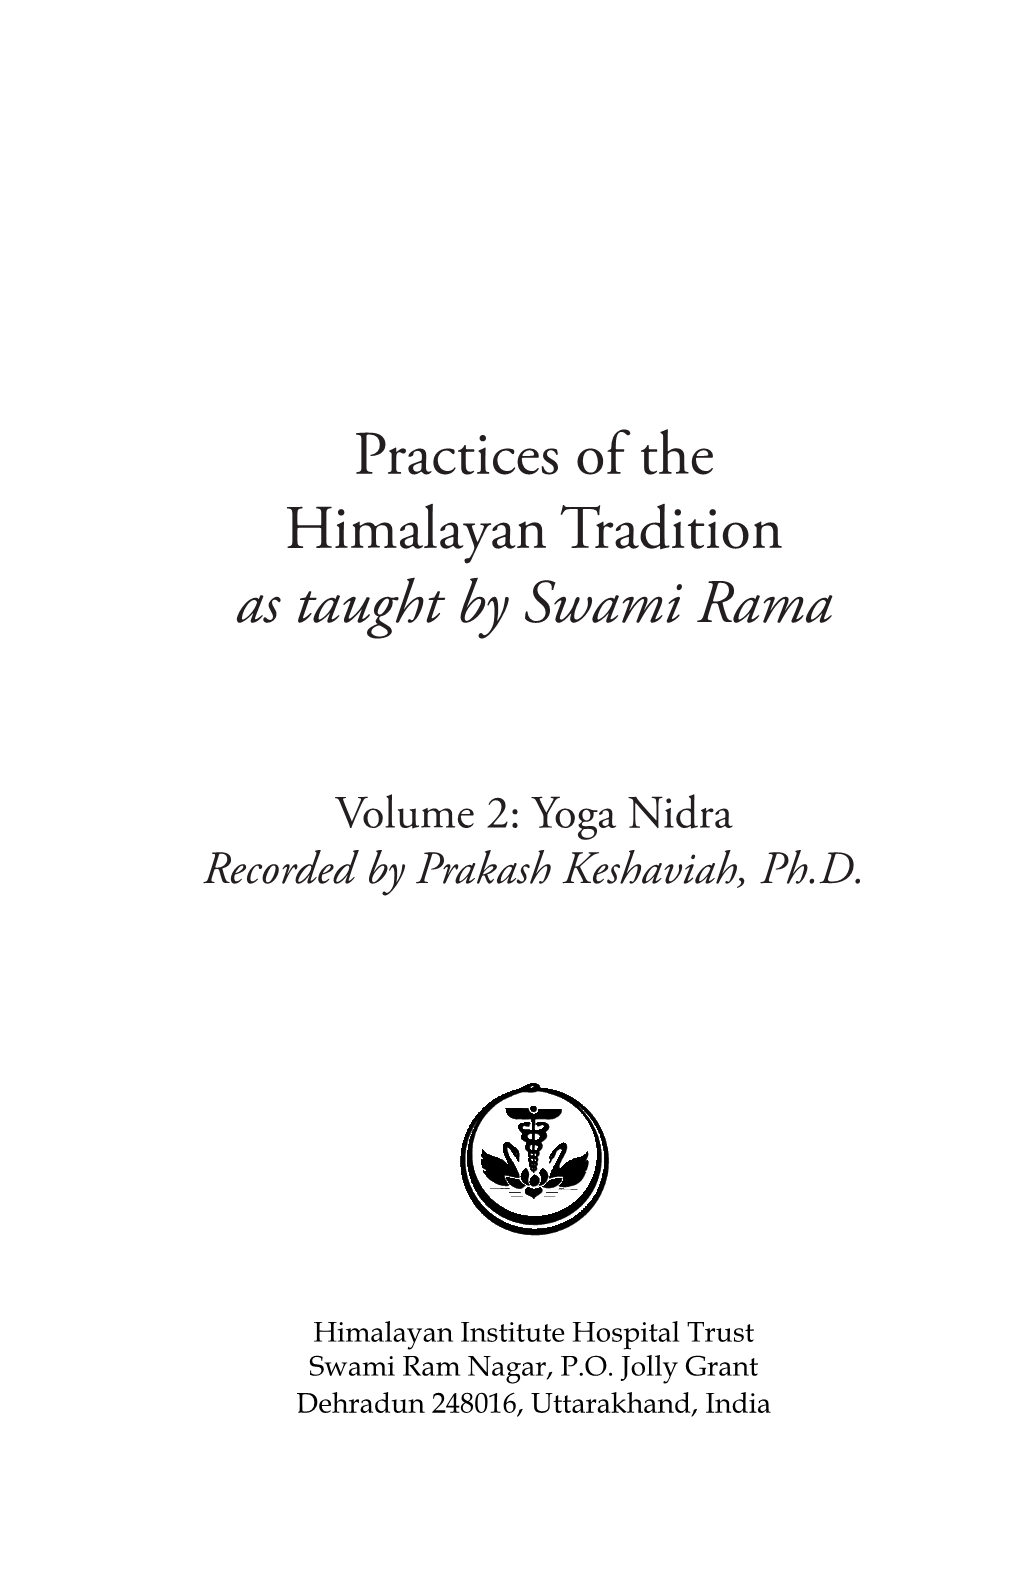 Practices of the Himalayan Tradition As Taught by Swami Rama